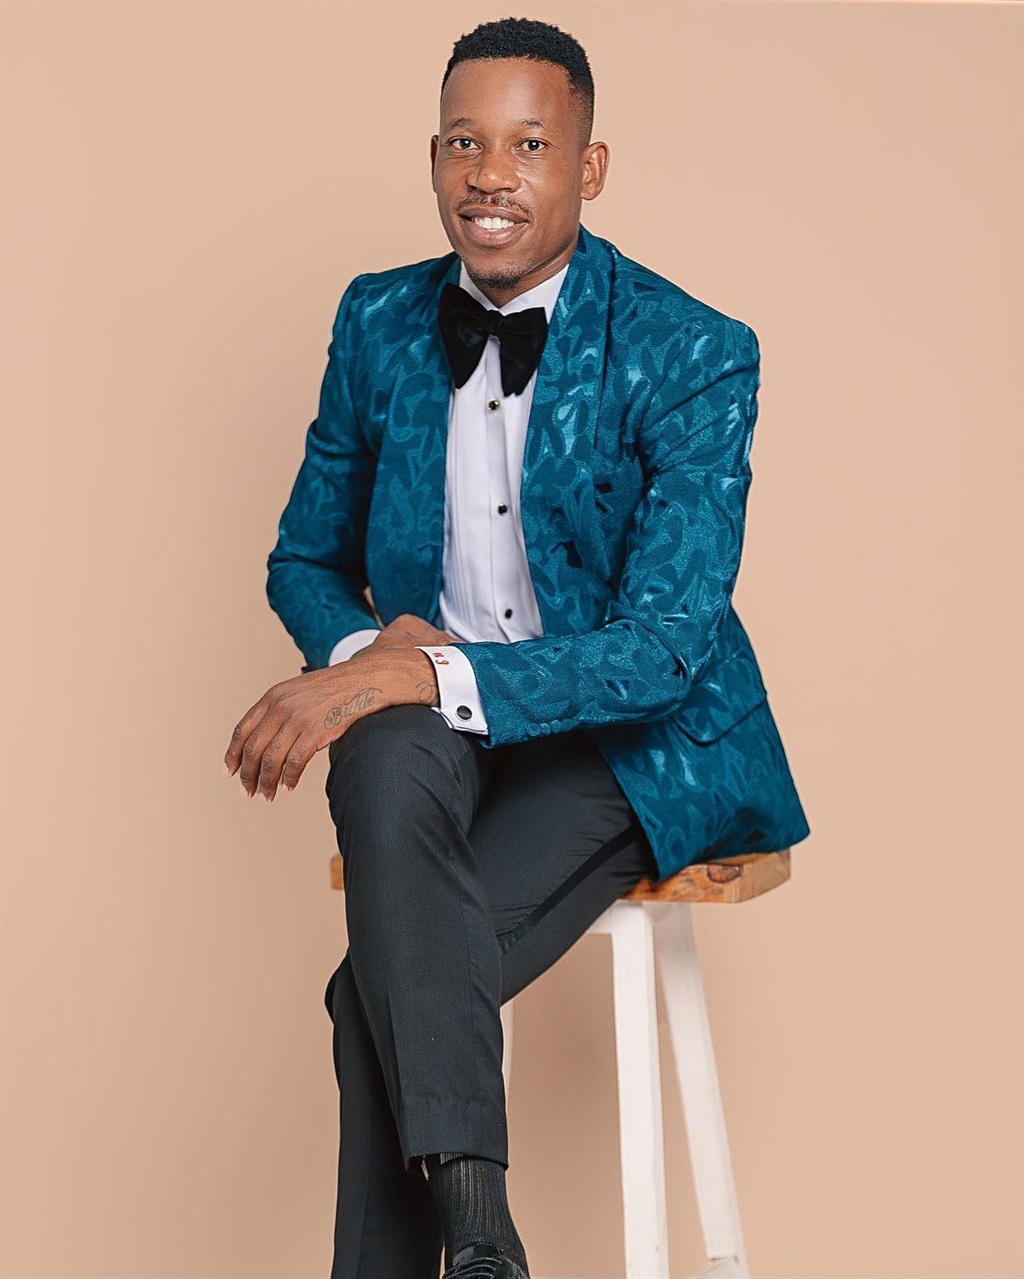 Royal AM star Happy Jele flaunts his suave formalwear outfit that is designed by high-end local brand Suit Luxe. 